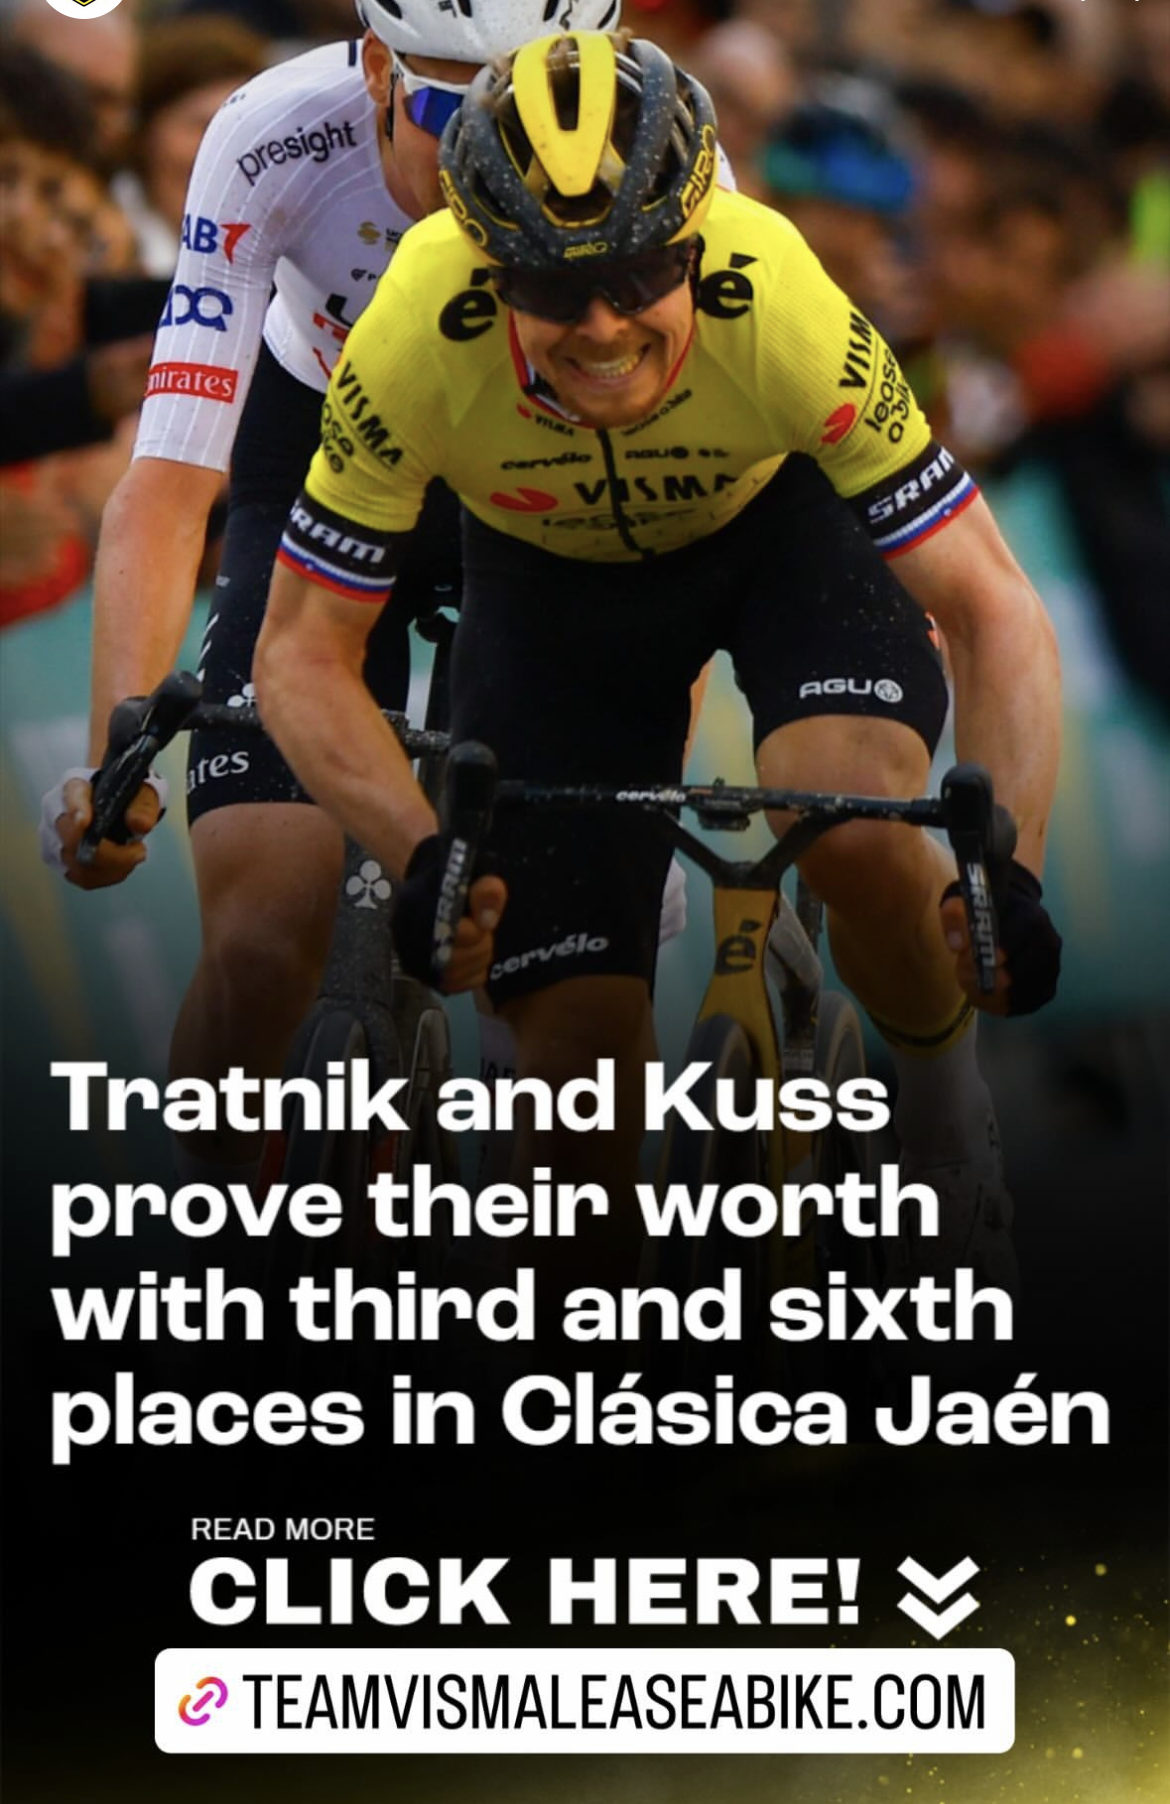 A screengrab of a Visma-Lease a Bike social media post showing Jan Tratnik at Clasica Jaen with the caption "Tratnik and Kuss prove their worth with third and sixth places in Clasica Jaen."